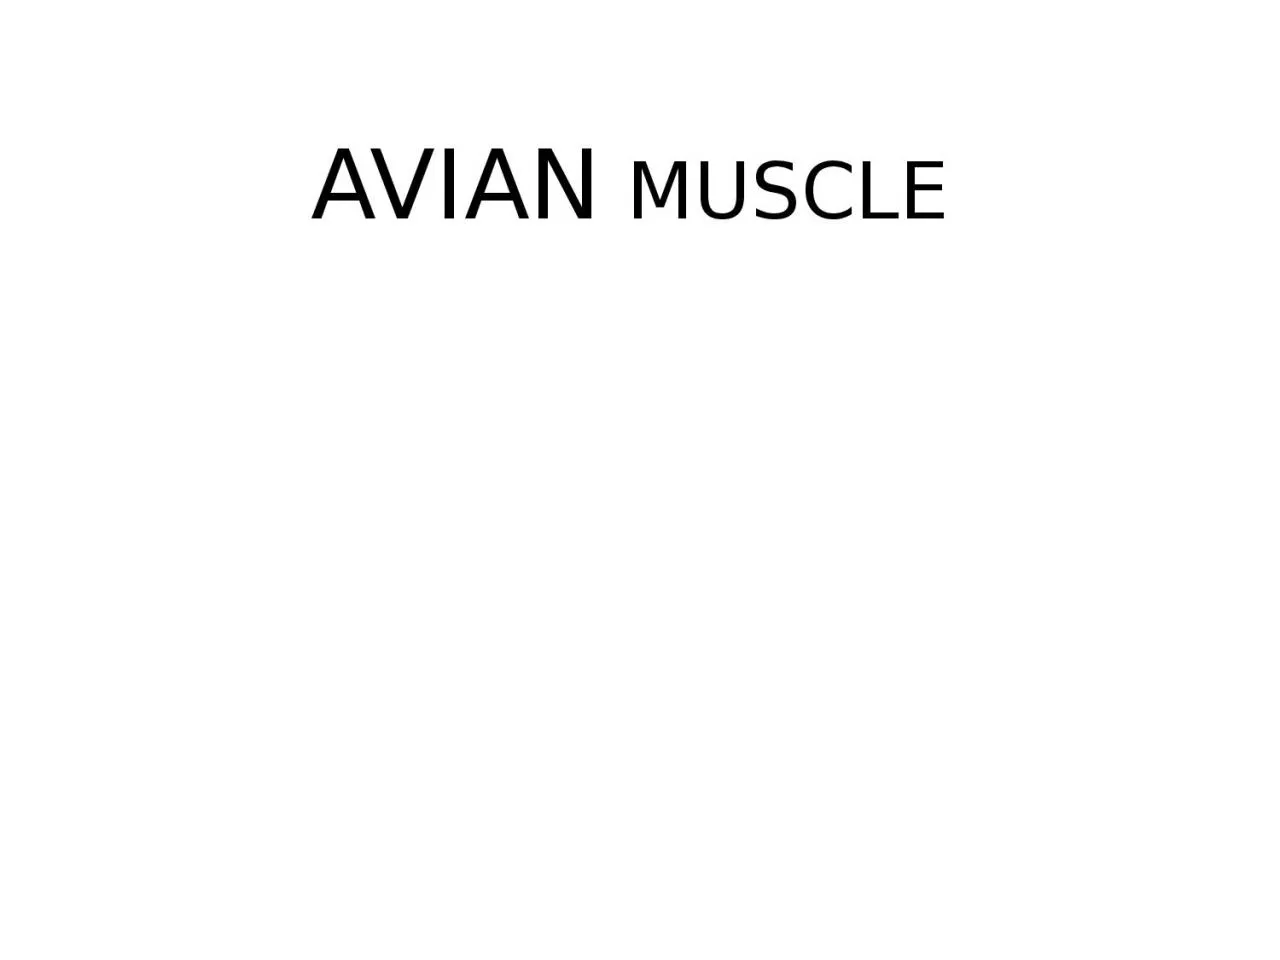 AVIAN  MUSCLE INTRODUCTION